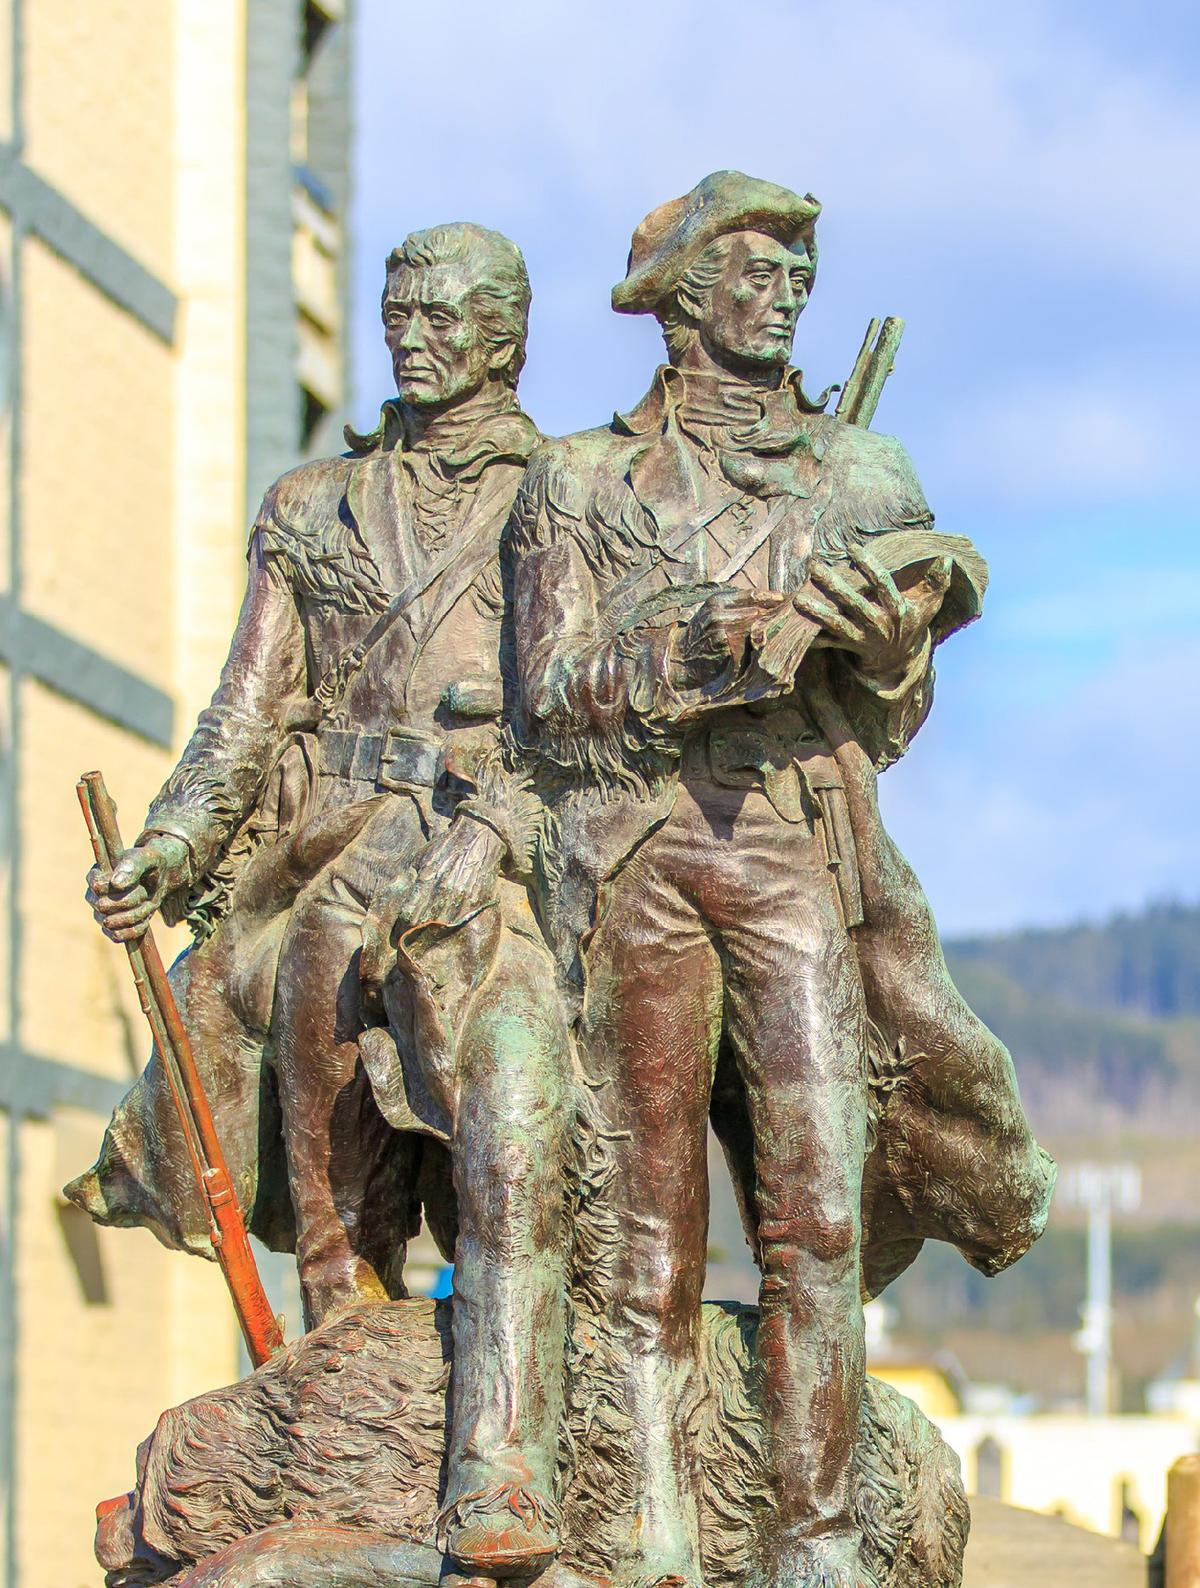 A statue titled “End of the Lewis and Clark Trail—Seaside, Oregon” by Ka!zen marks the ending point of the pair’s famous expedition. (Peng Pe/Dreamstime.com)